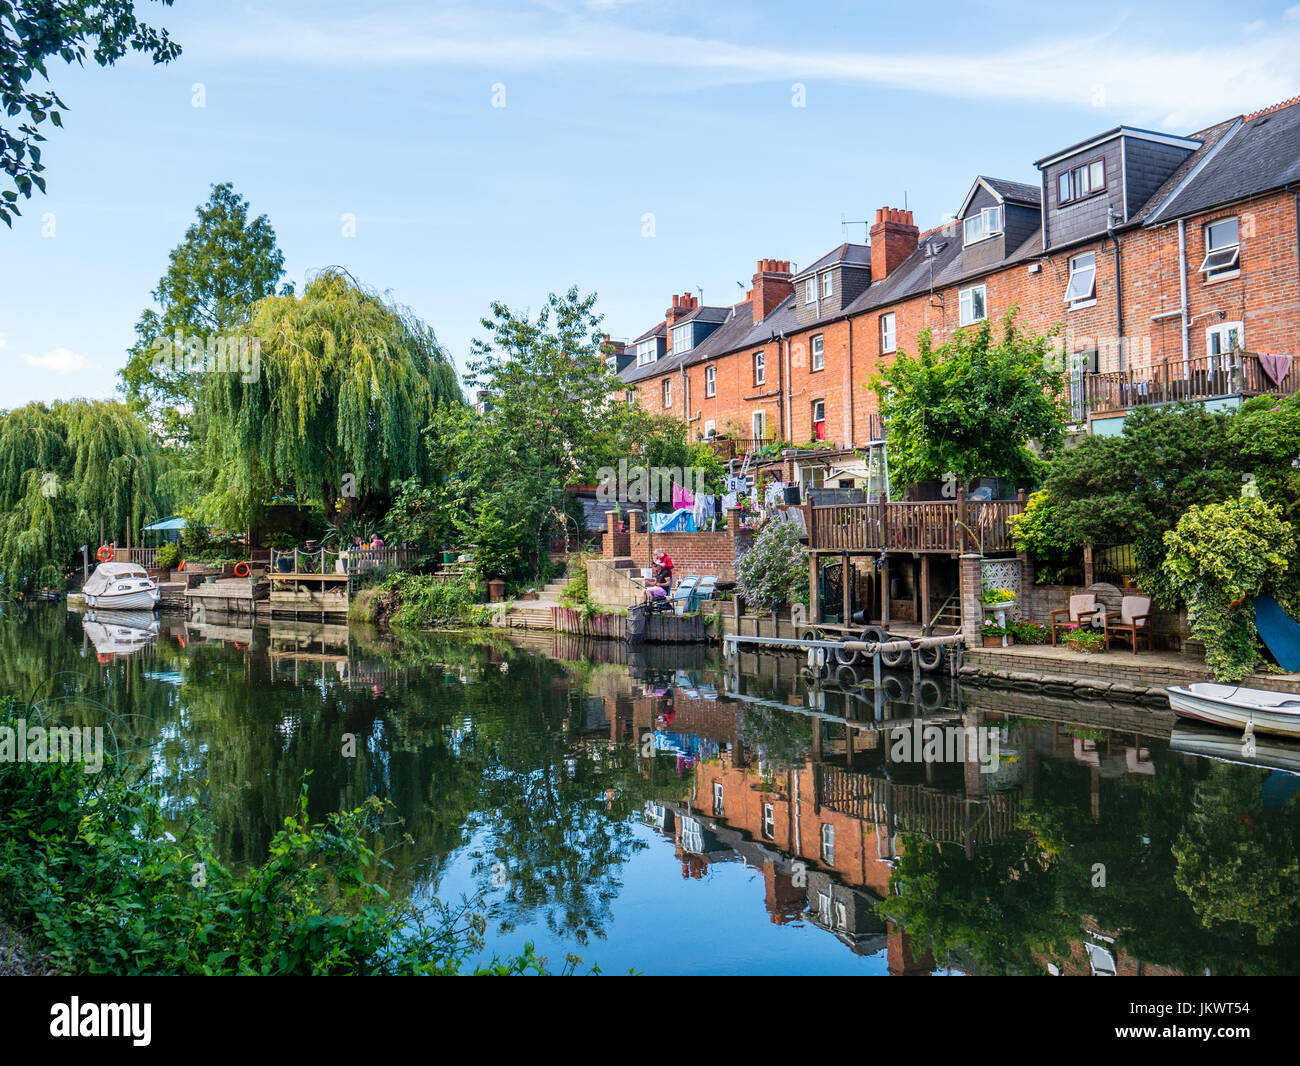 Terrace Housing and Gardens, River Kennet, Reading, Berkshire, England Stock Photo